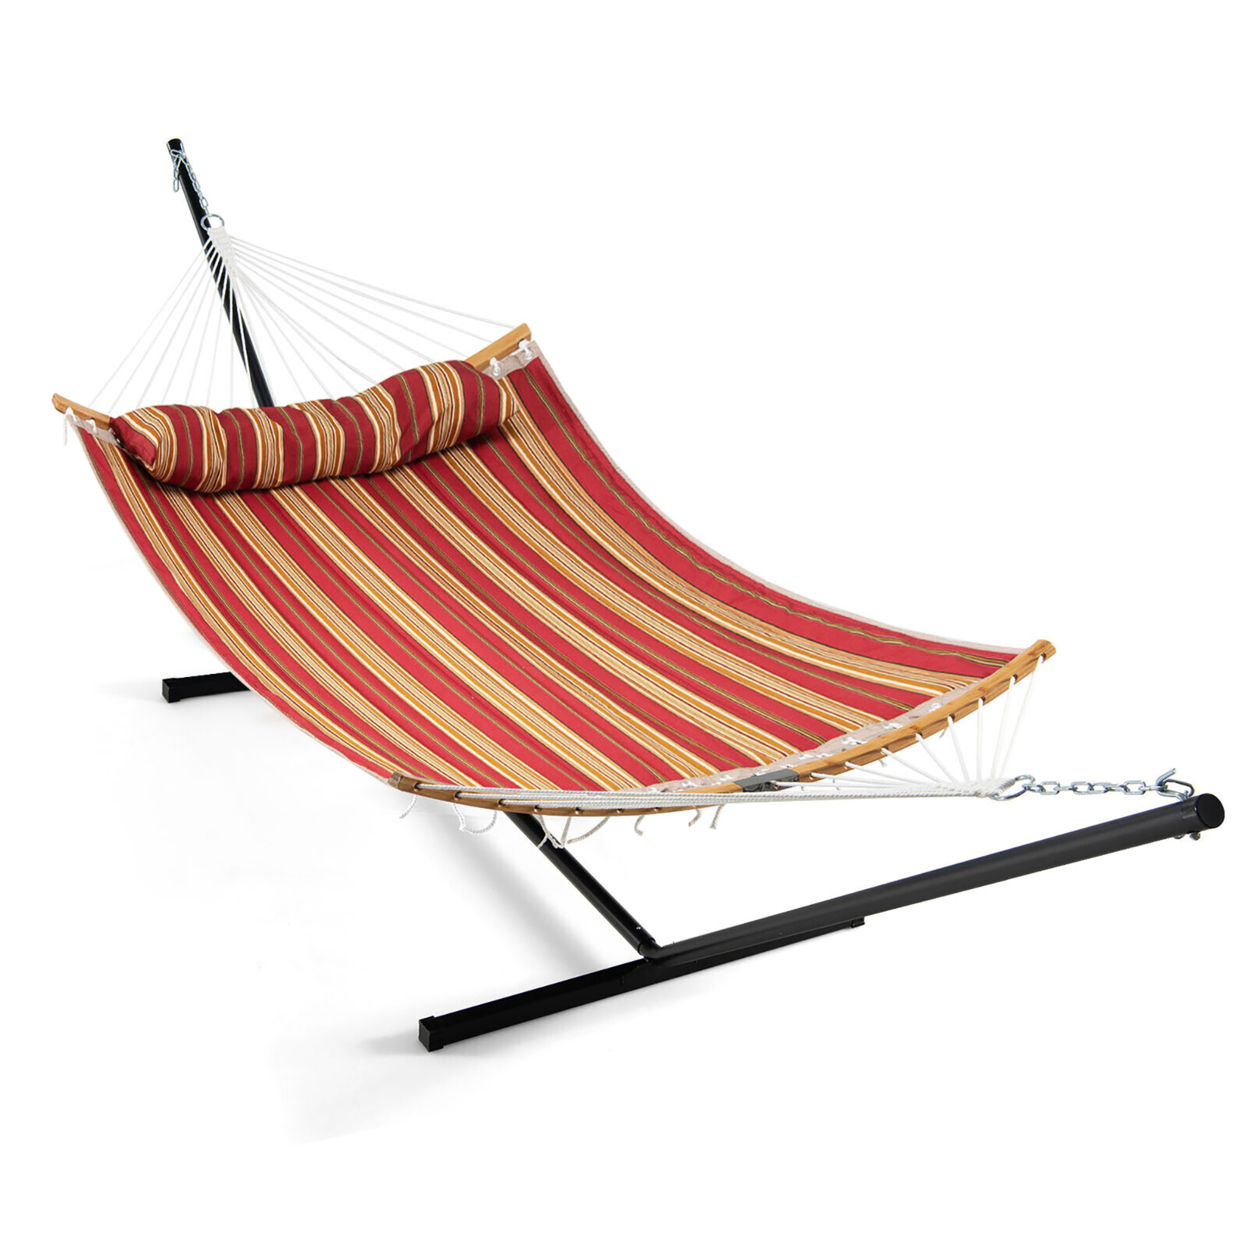 Hammock Chair With Stand Portable Bag Cushion Pillow Heavy Duty Frame - Red